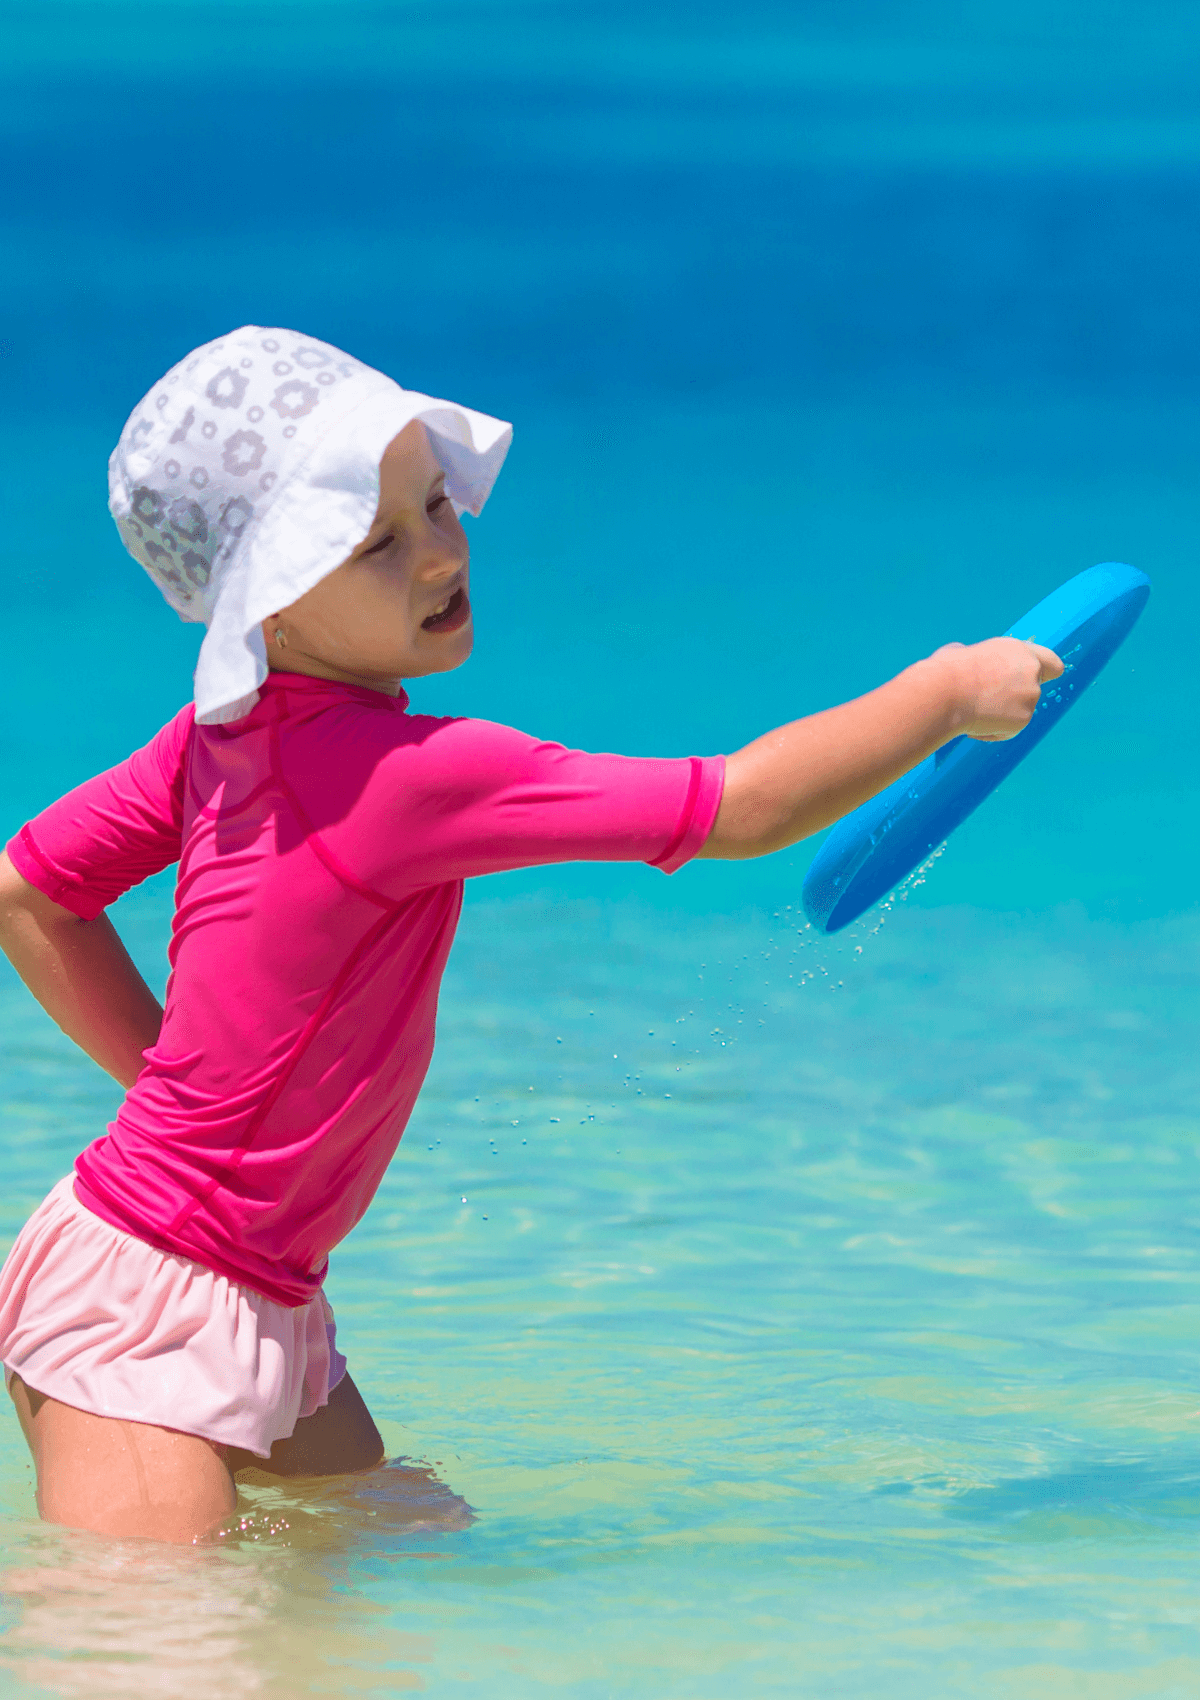 Pack a frisbee for the family to play on the beach